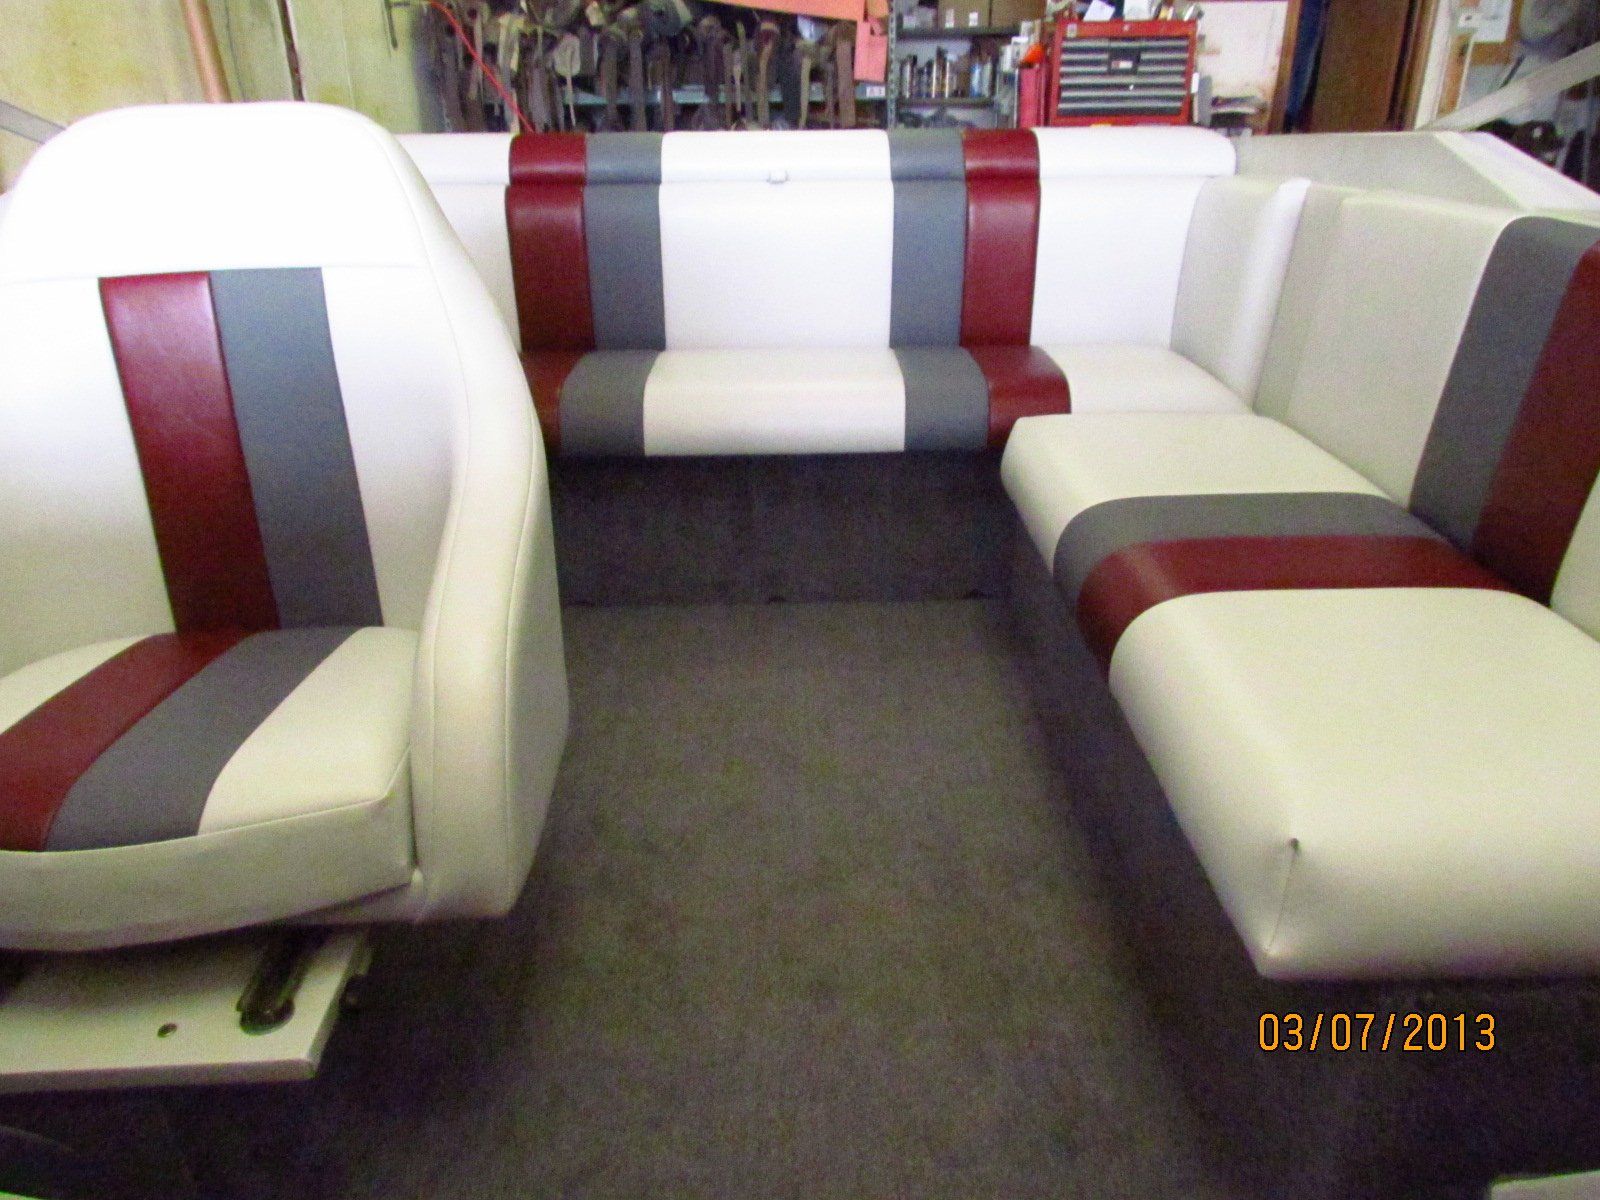 White, gray, and burgundy leather boating interior